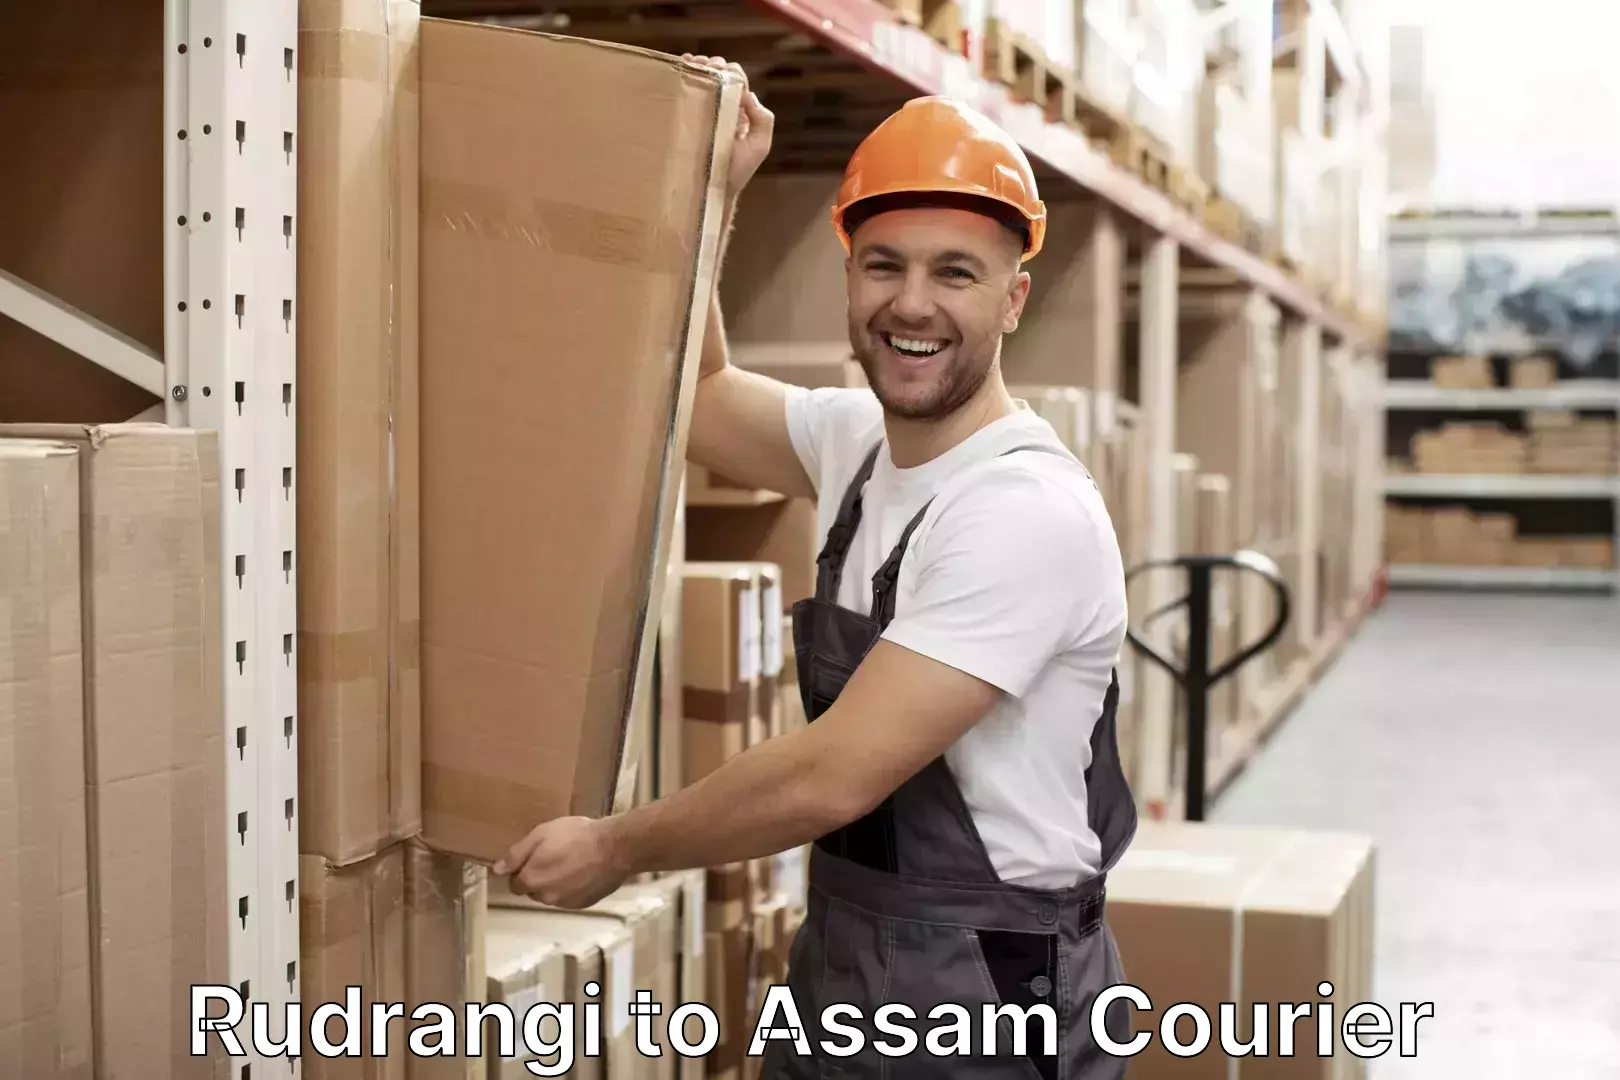 Luggage transport consultancy Rudrangi to Lala Assam